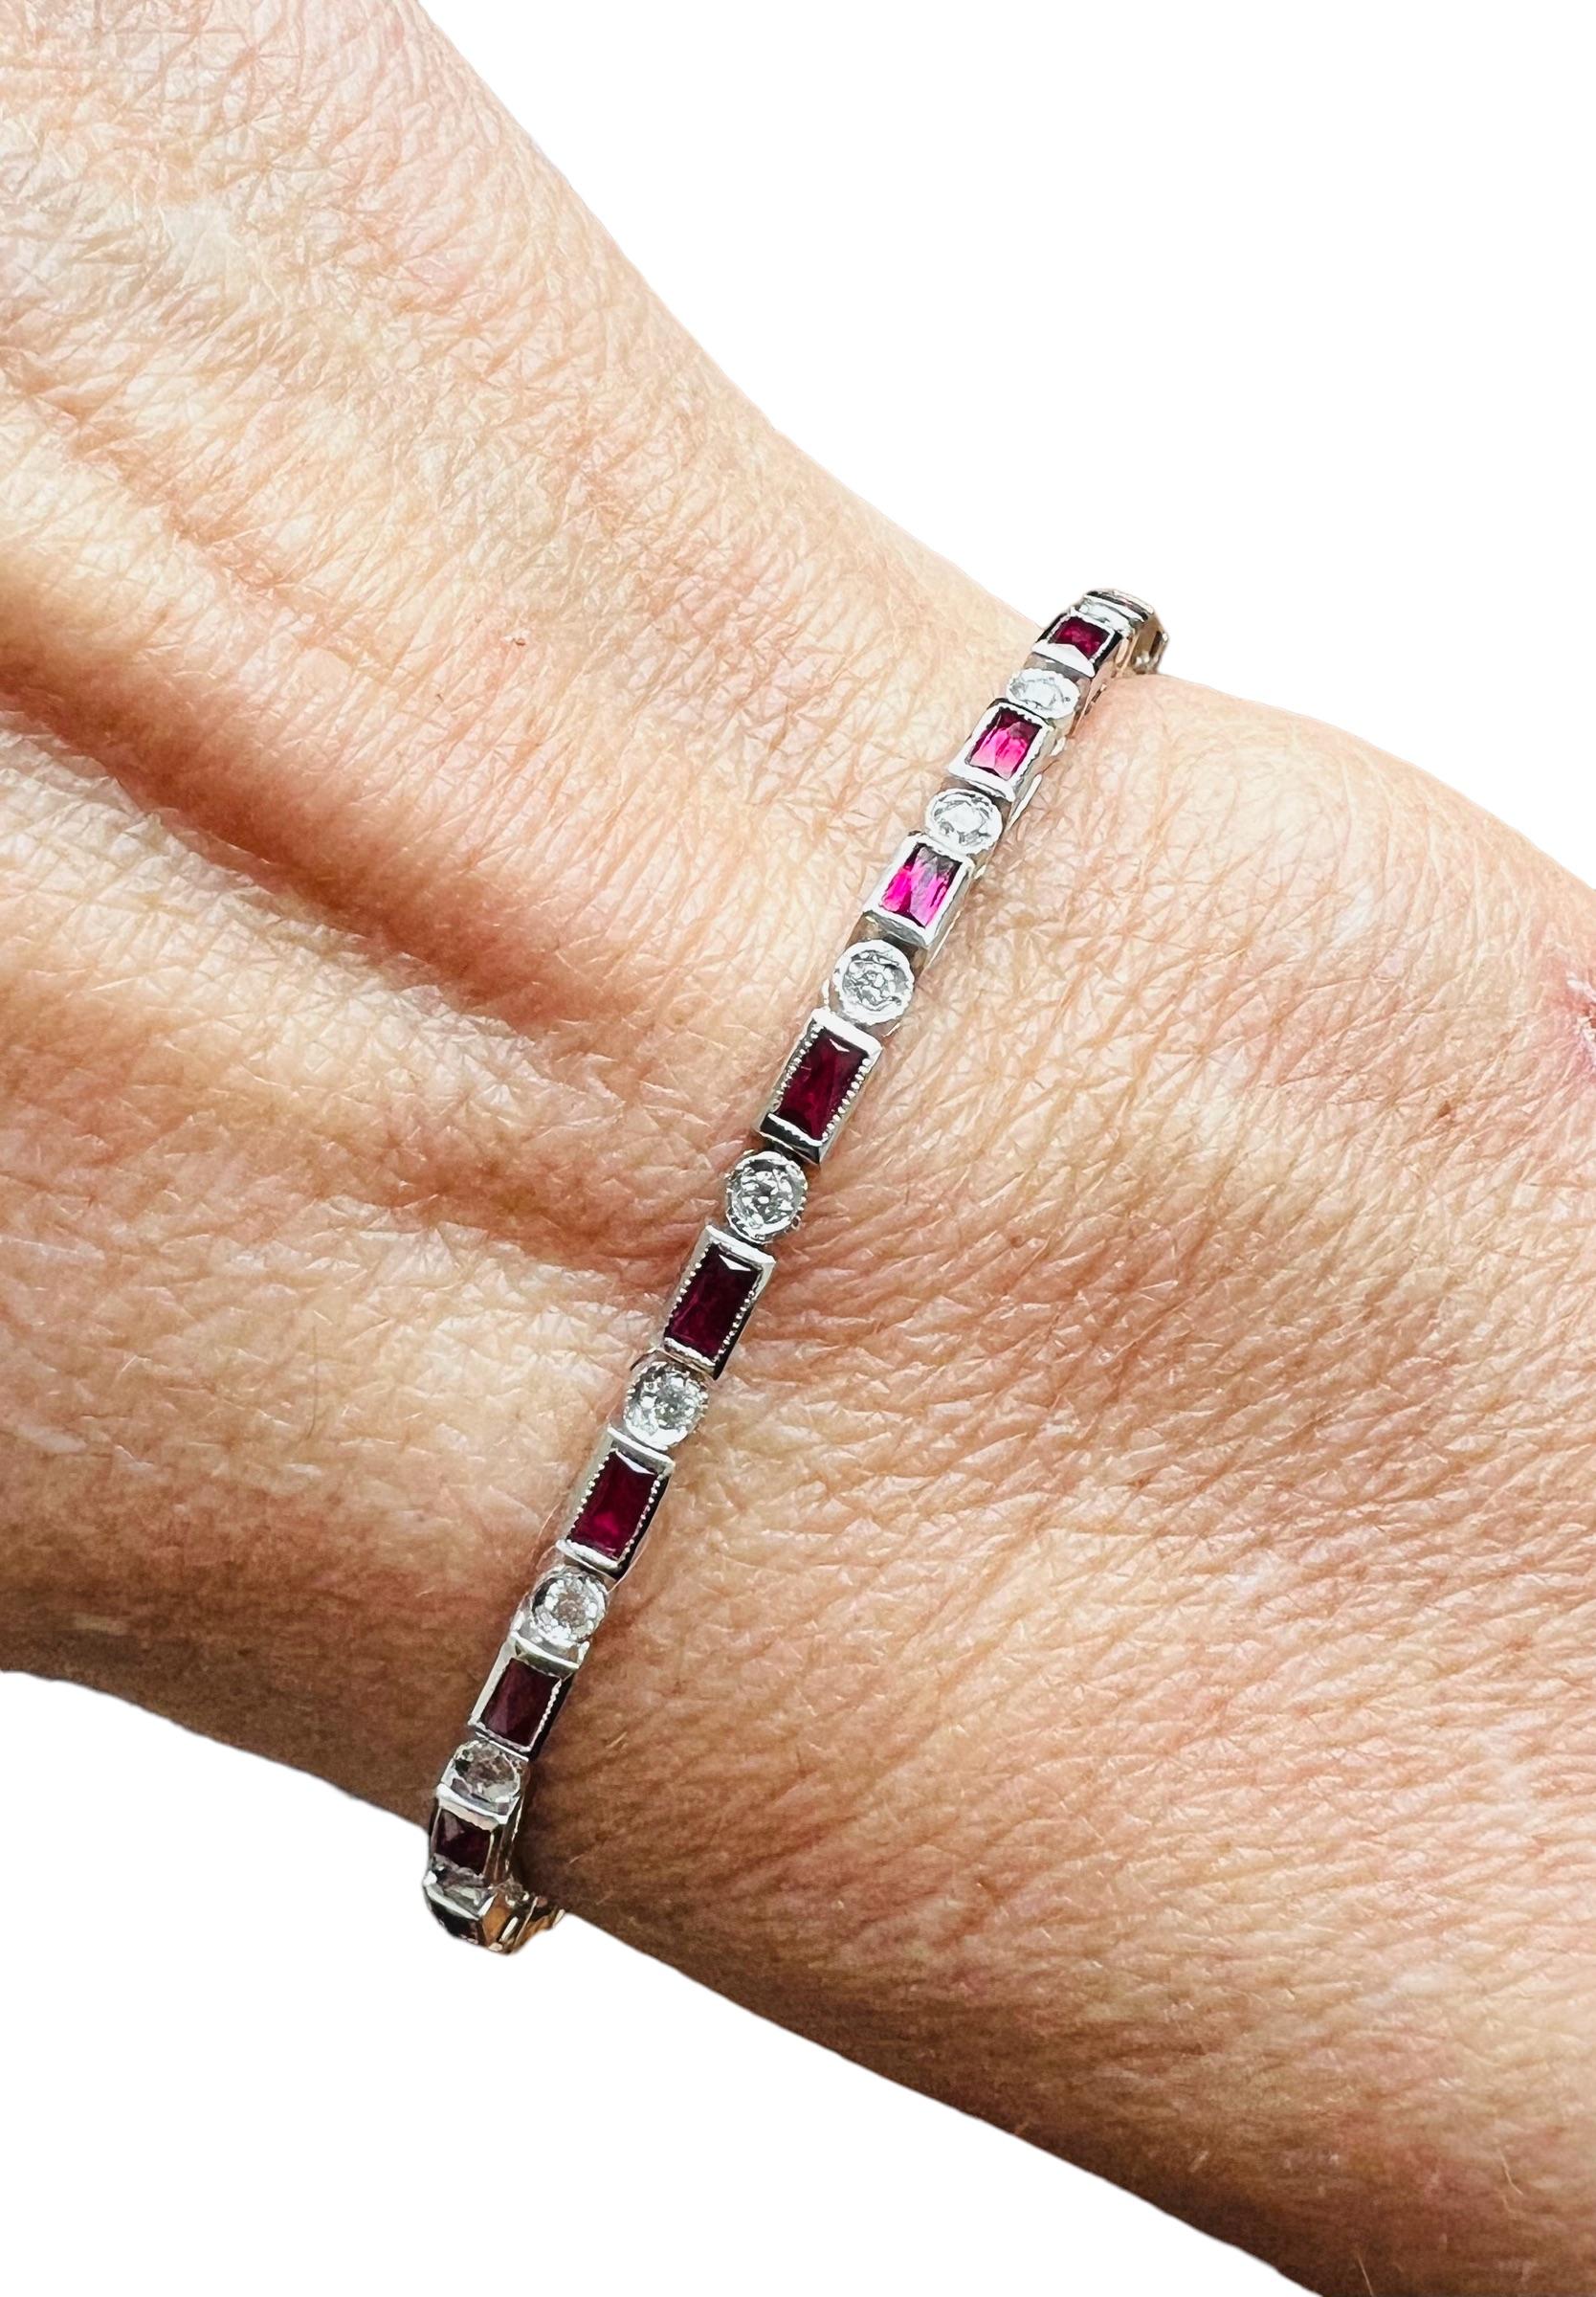 Round Cut 18 Kt White Gold Bracelet Set with Diamonds and Rubies